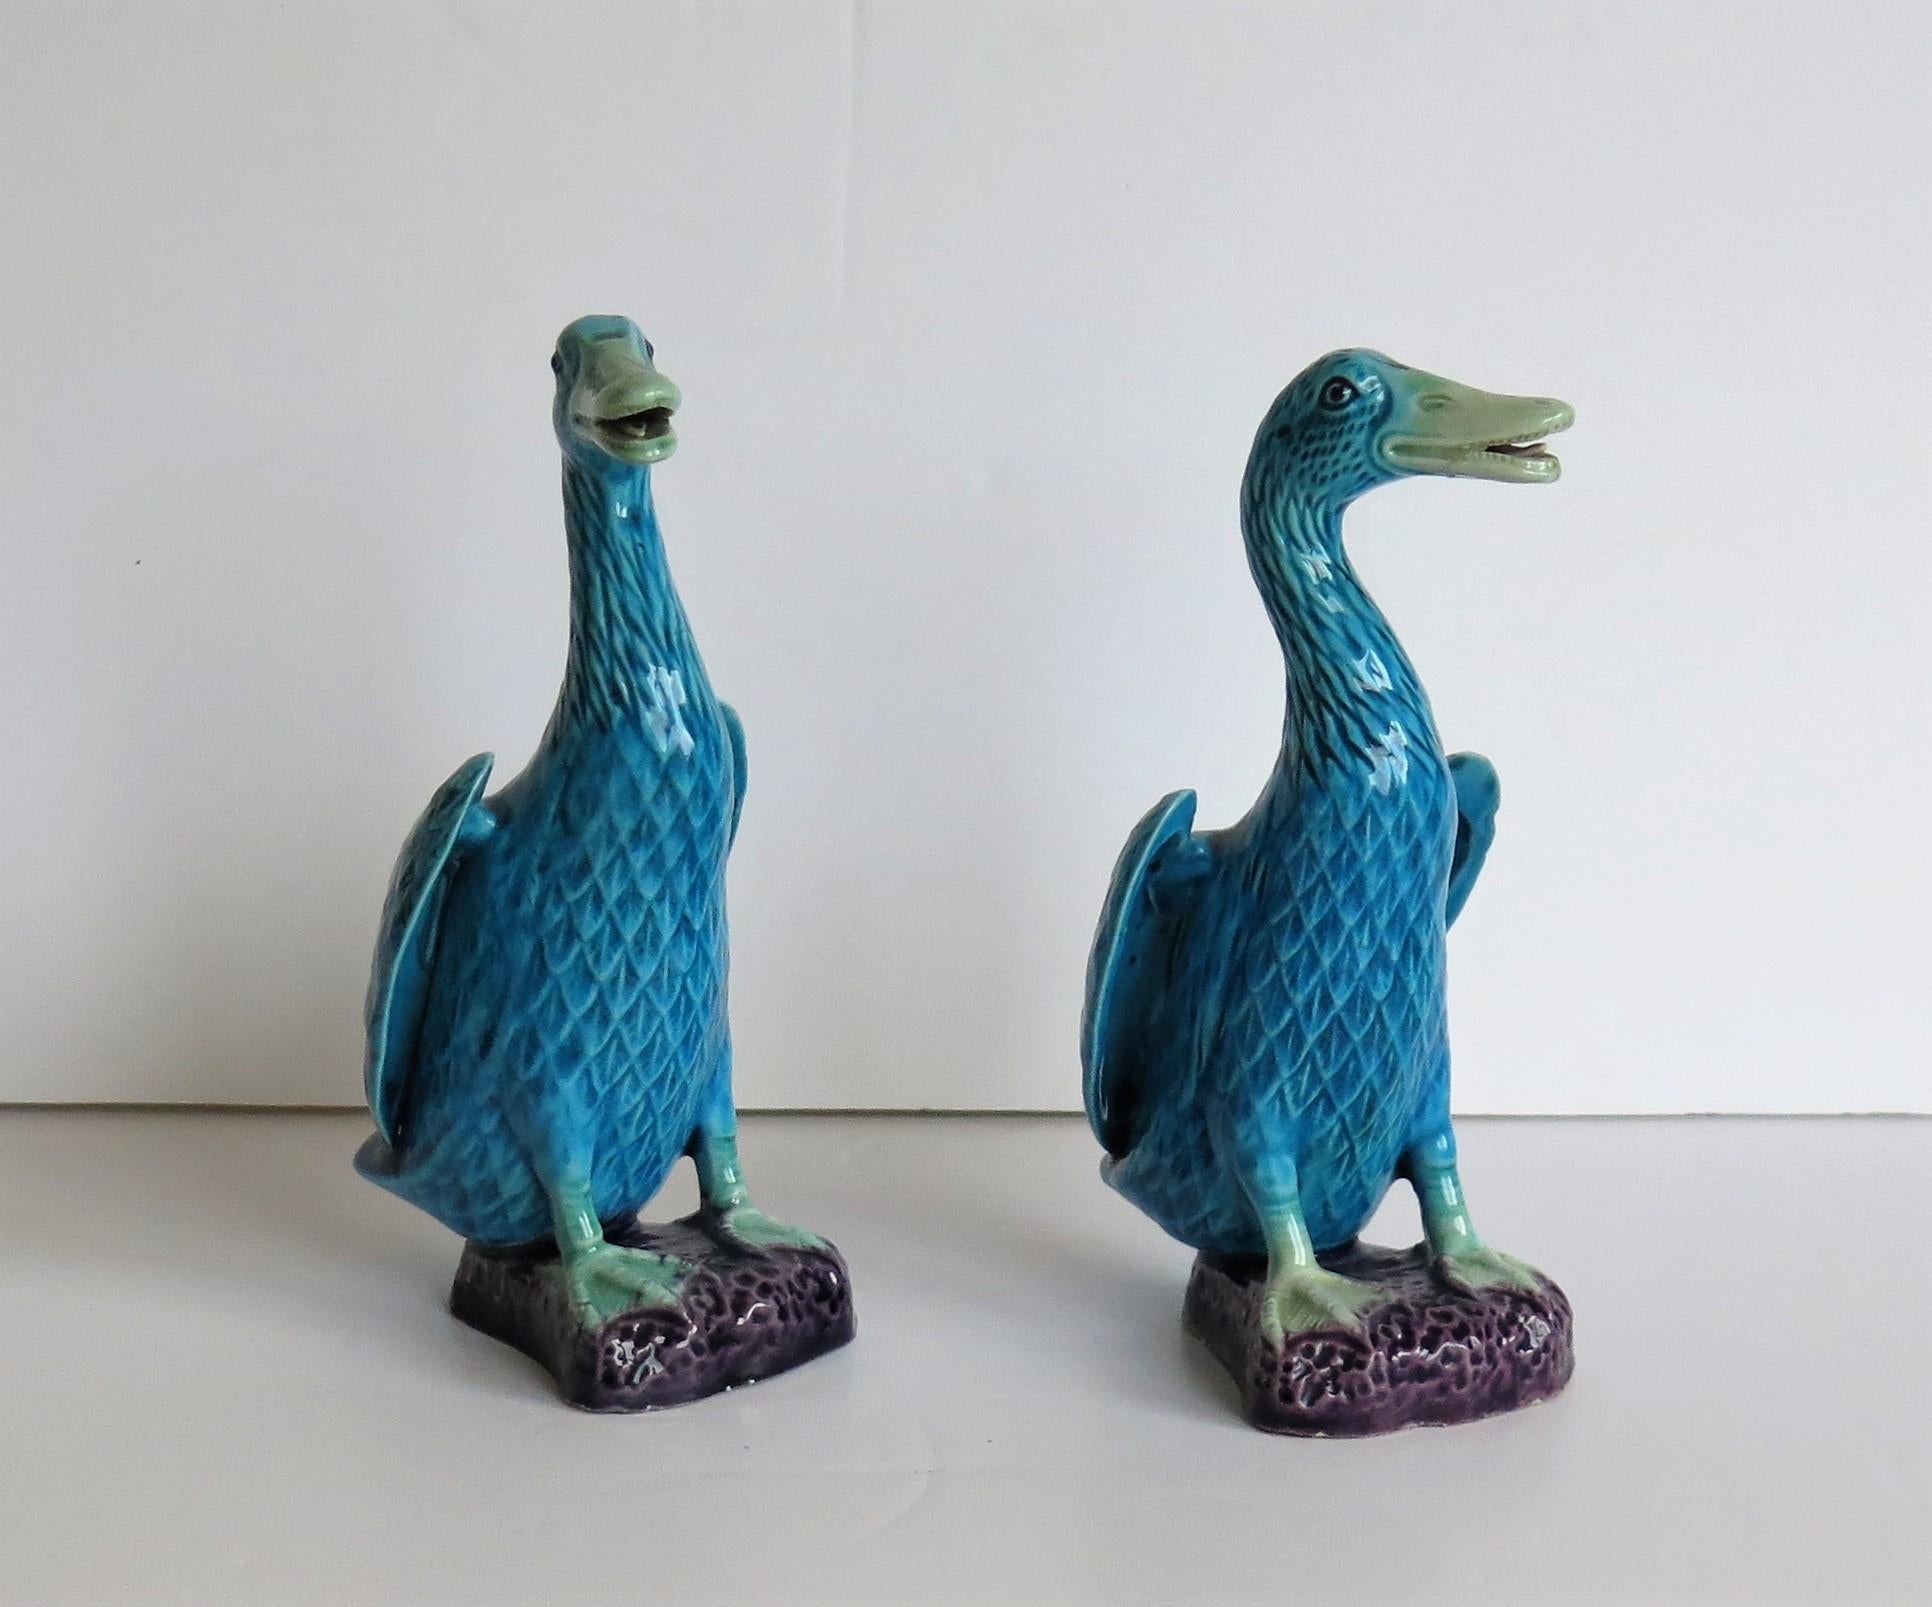 Glazed Two Chinese Export Porcelain Geese or Goose Bird Figurines in Poychrome Enamels